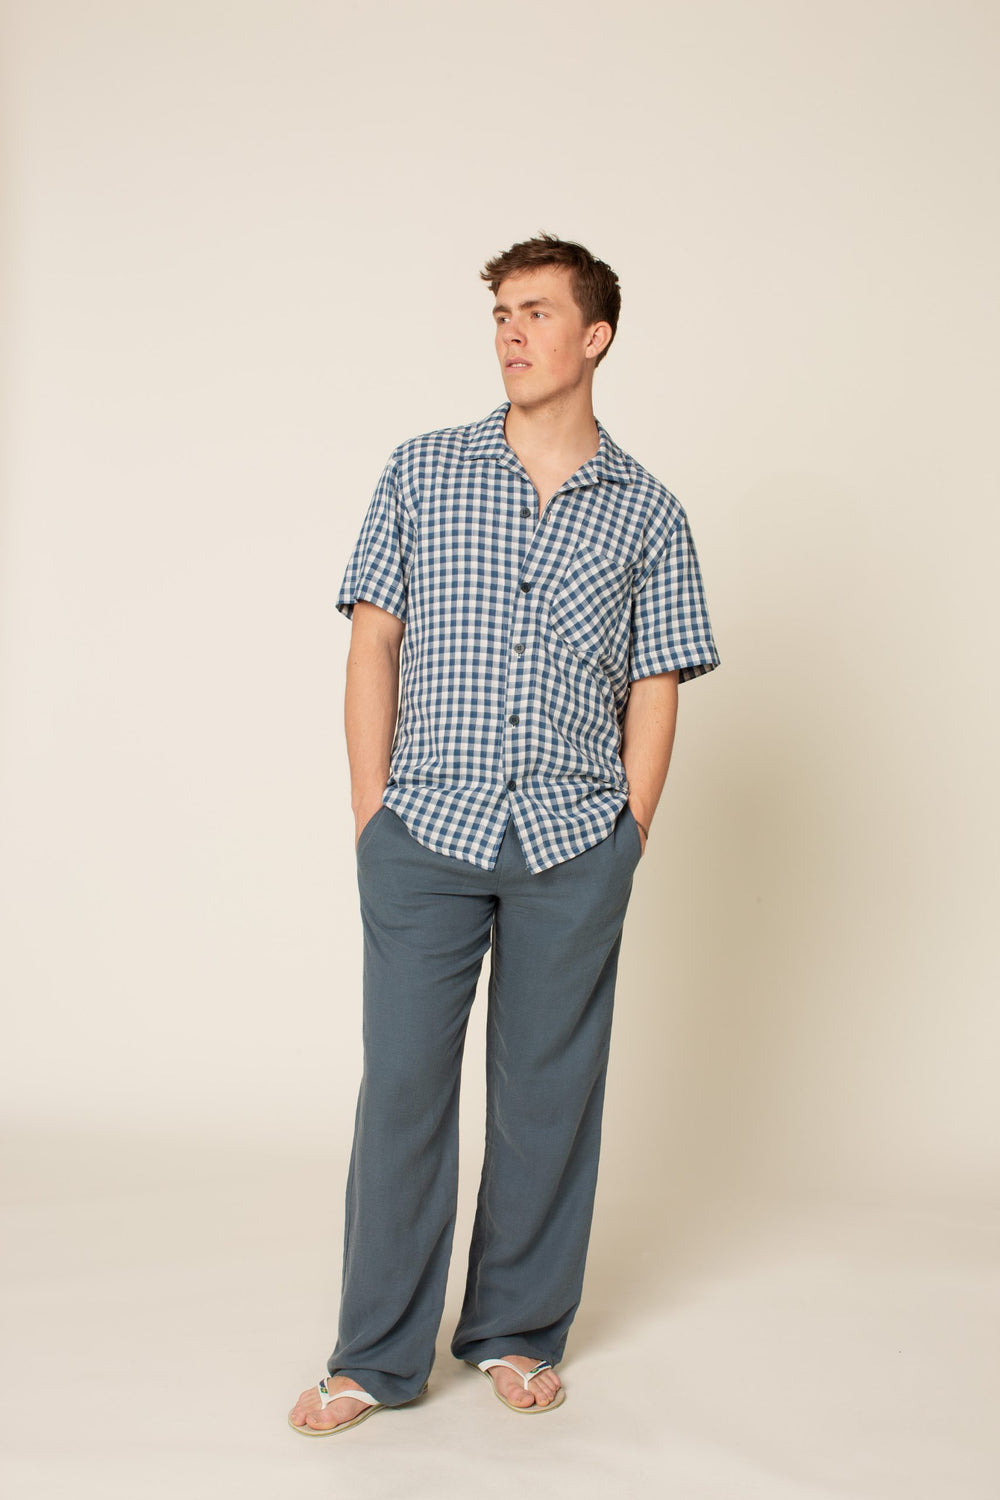 Man wearing the Men's Loose Linen Pants sewing pattern from Wardrobe by Me on The Fold Line. A trouser pattern made in linen, cotton or viscose fabrics, featuring an elasticated waist with drawstring, in-seam side pockets, back patch pocket, and relaxed f